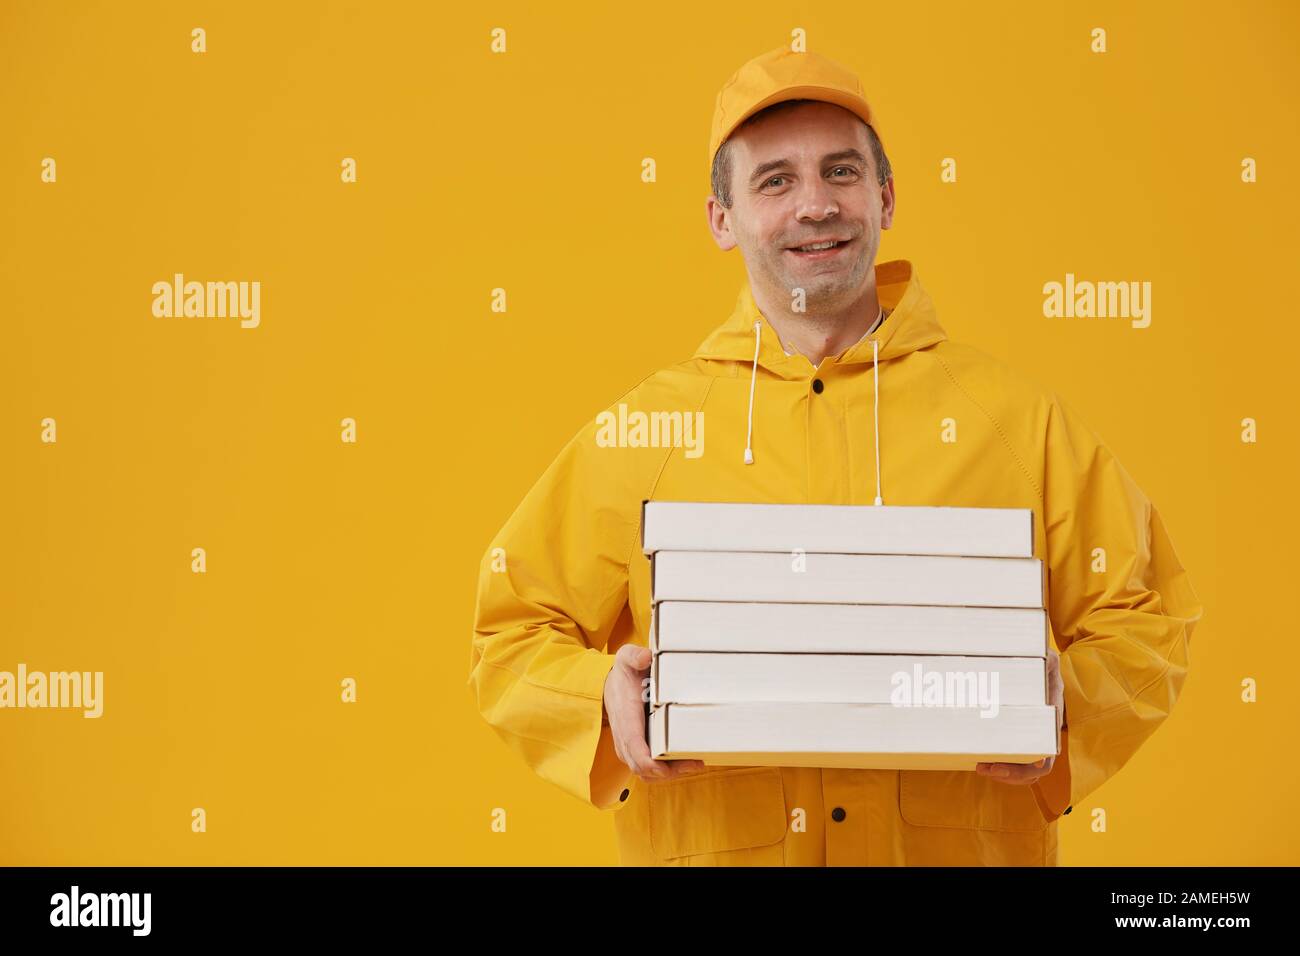 Waist up portrait of adult delivery man holding pizza boxes and smiling at camera standing against pop yellow background, copy space Stock Photo